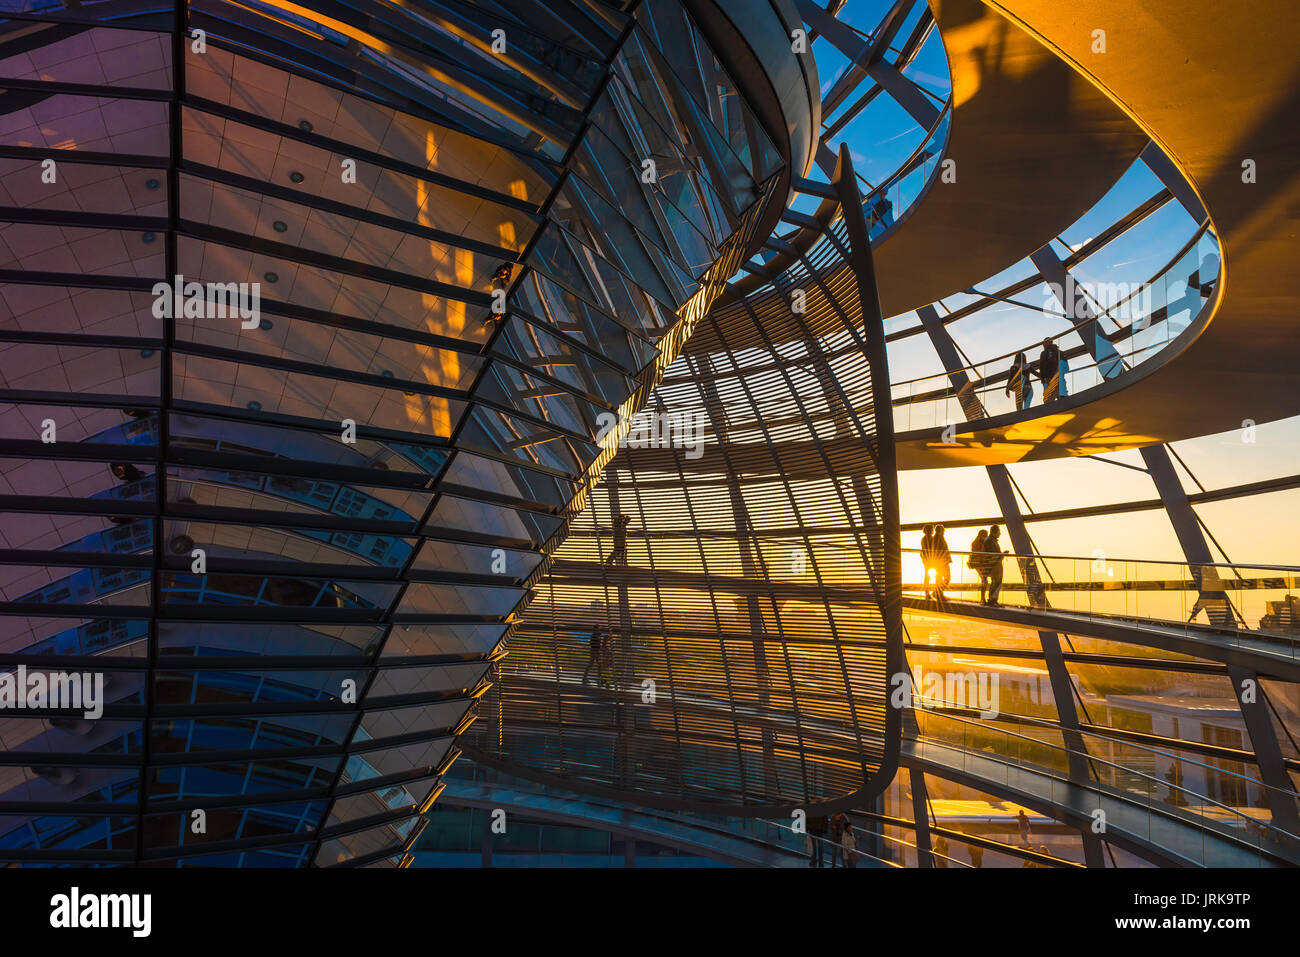 Berlin Reichstag interior, a Berlin sunset viewed by tourists from inside the glass dome on the roof of the Reichstag building, Berlin, Germany. Stock Photo